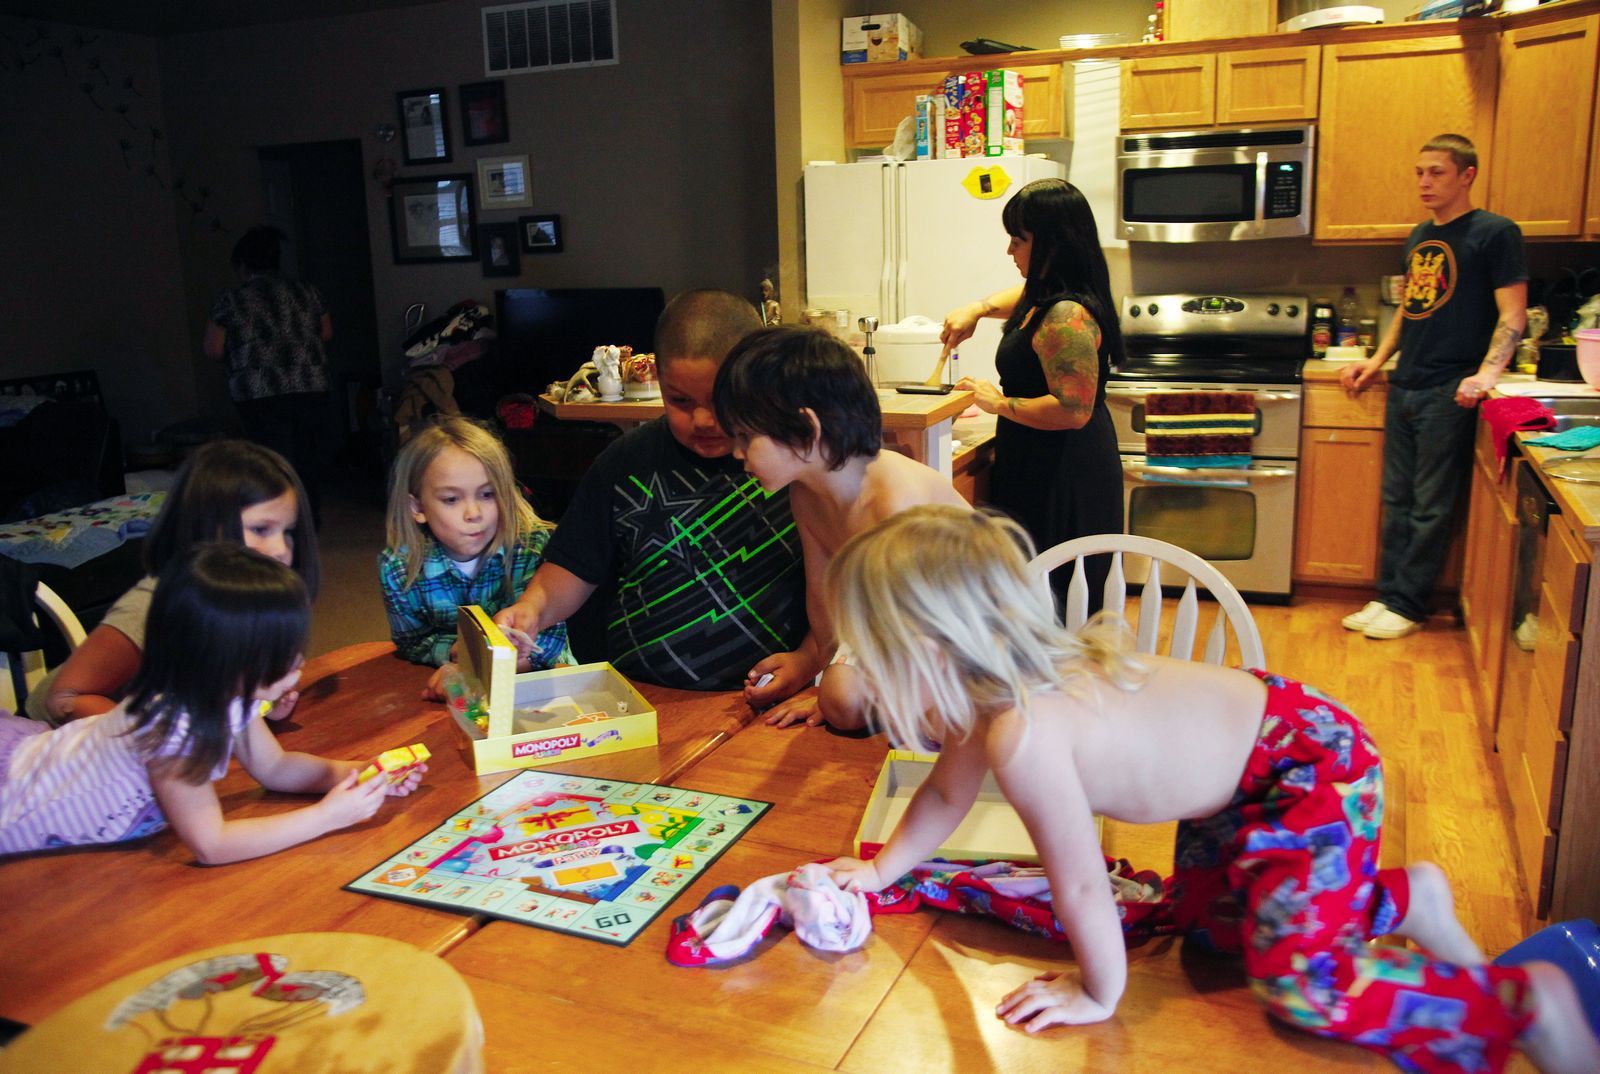 Genna Martin / The HeraldFrom left, Katie Hots, 4; Calista Weiser, 5; KC Hots, 7; Irwin Weiser, 8; Kane Hots, 5; and Aloisius Williams, 2, play Monopoly as Natasha Gobin and her spouse, Thomas Williams, make dinner at their home in Tulalip. Gobin, who teaches Lushootseed language classes, asks her children, KC, Kane, Katie and Aloisius, to count in Lushootseed as they play the game.